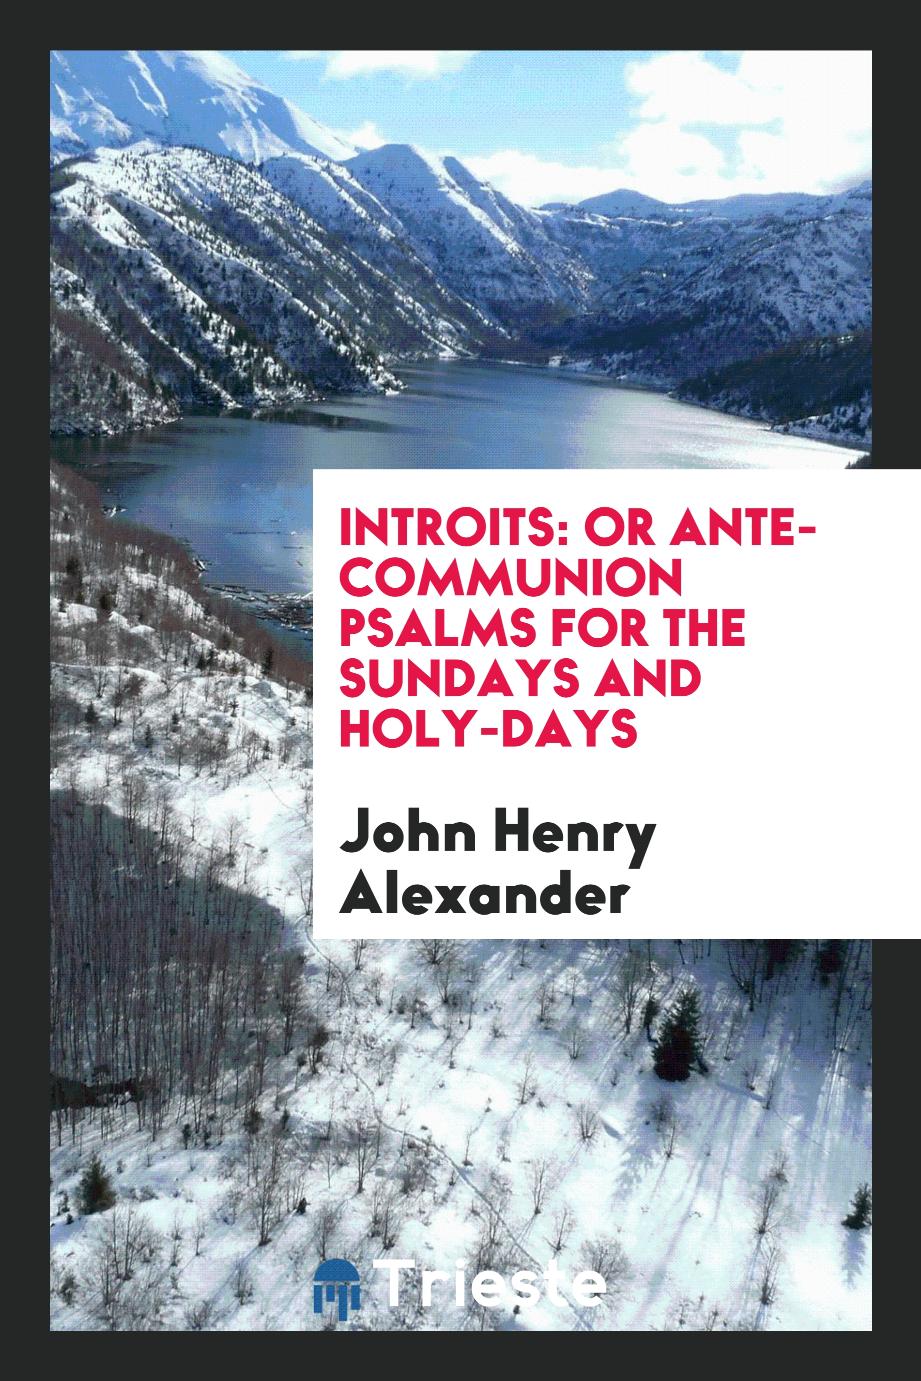 Introits: or Ante-communion psalms for the Sundays and Holy-Days